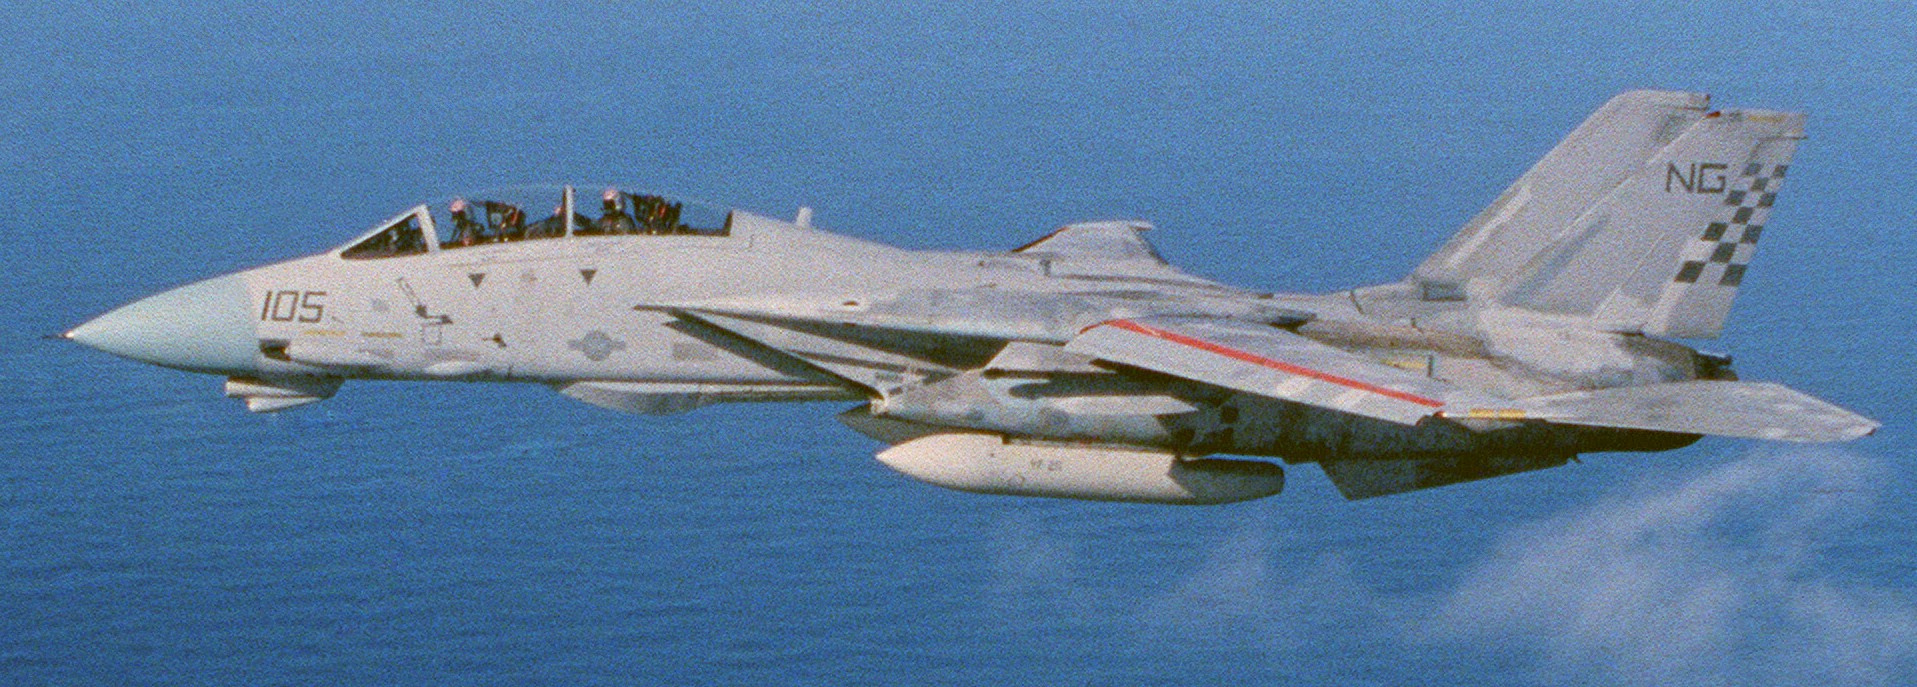 vf-211 fighting checkmates fighter squadron f-14a tomcat us navy carrier air wing cvw-9 uss kitty hawk cv-63 91